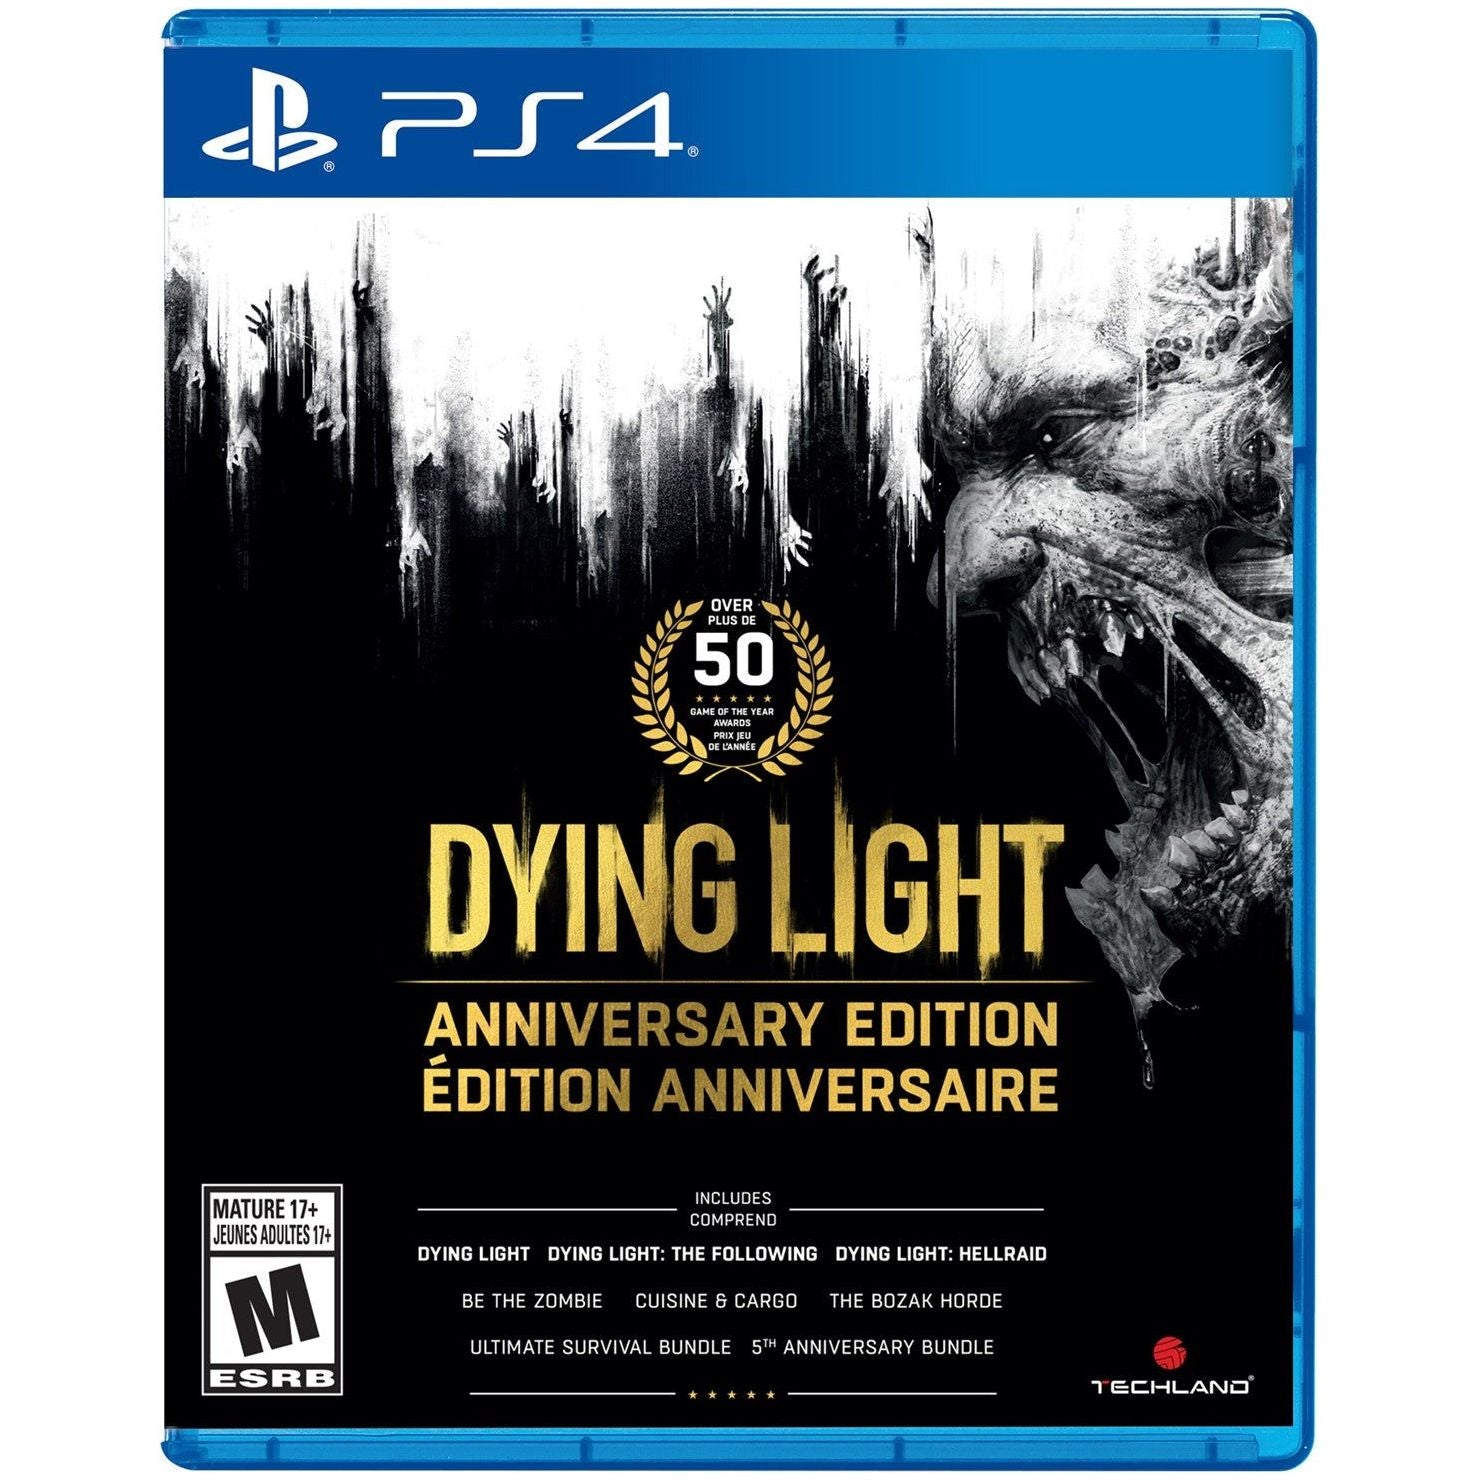 PS4 - Dying Light Anniversary Edition